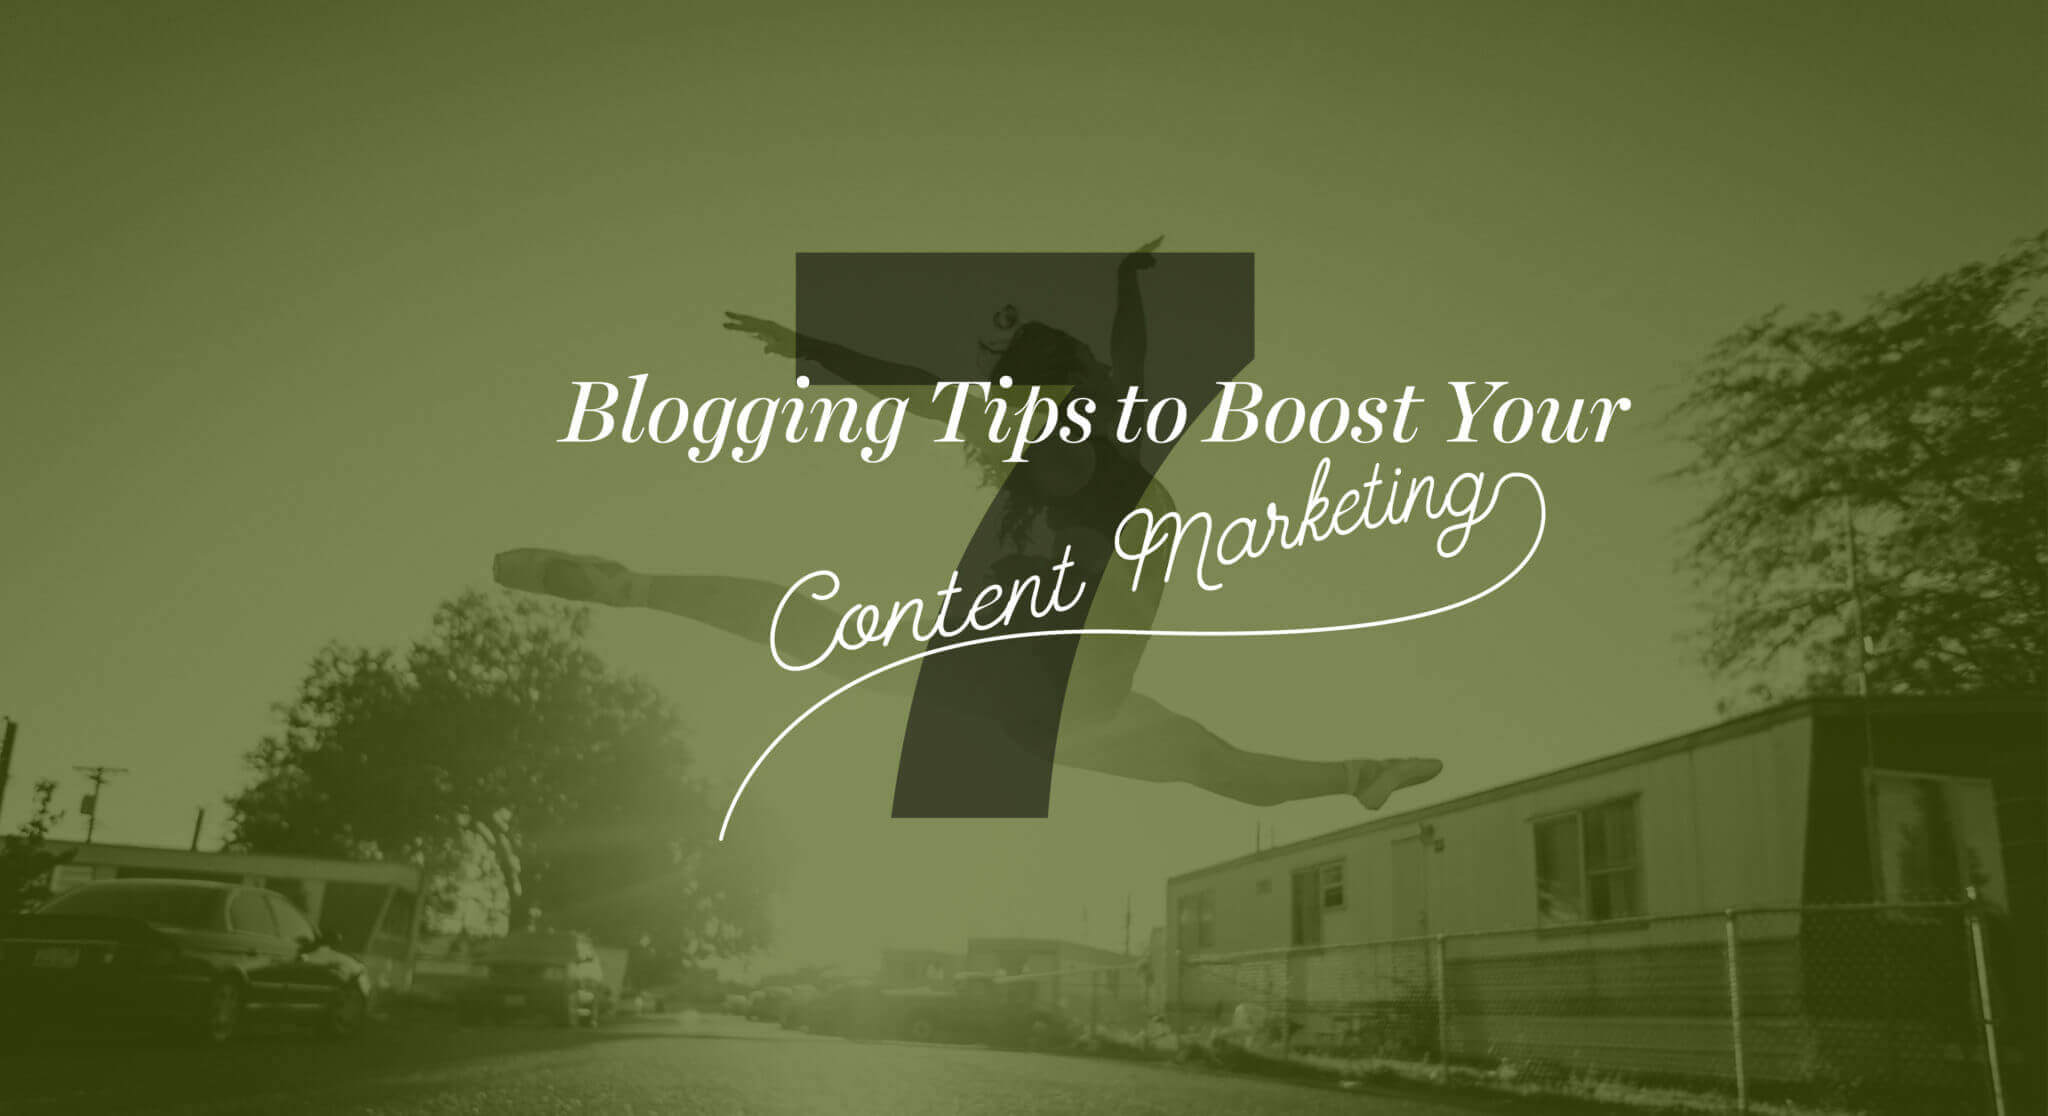 7 Blogging Tips to Boost Your Content Marketing in 2018